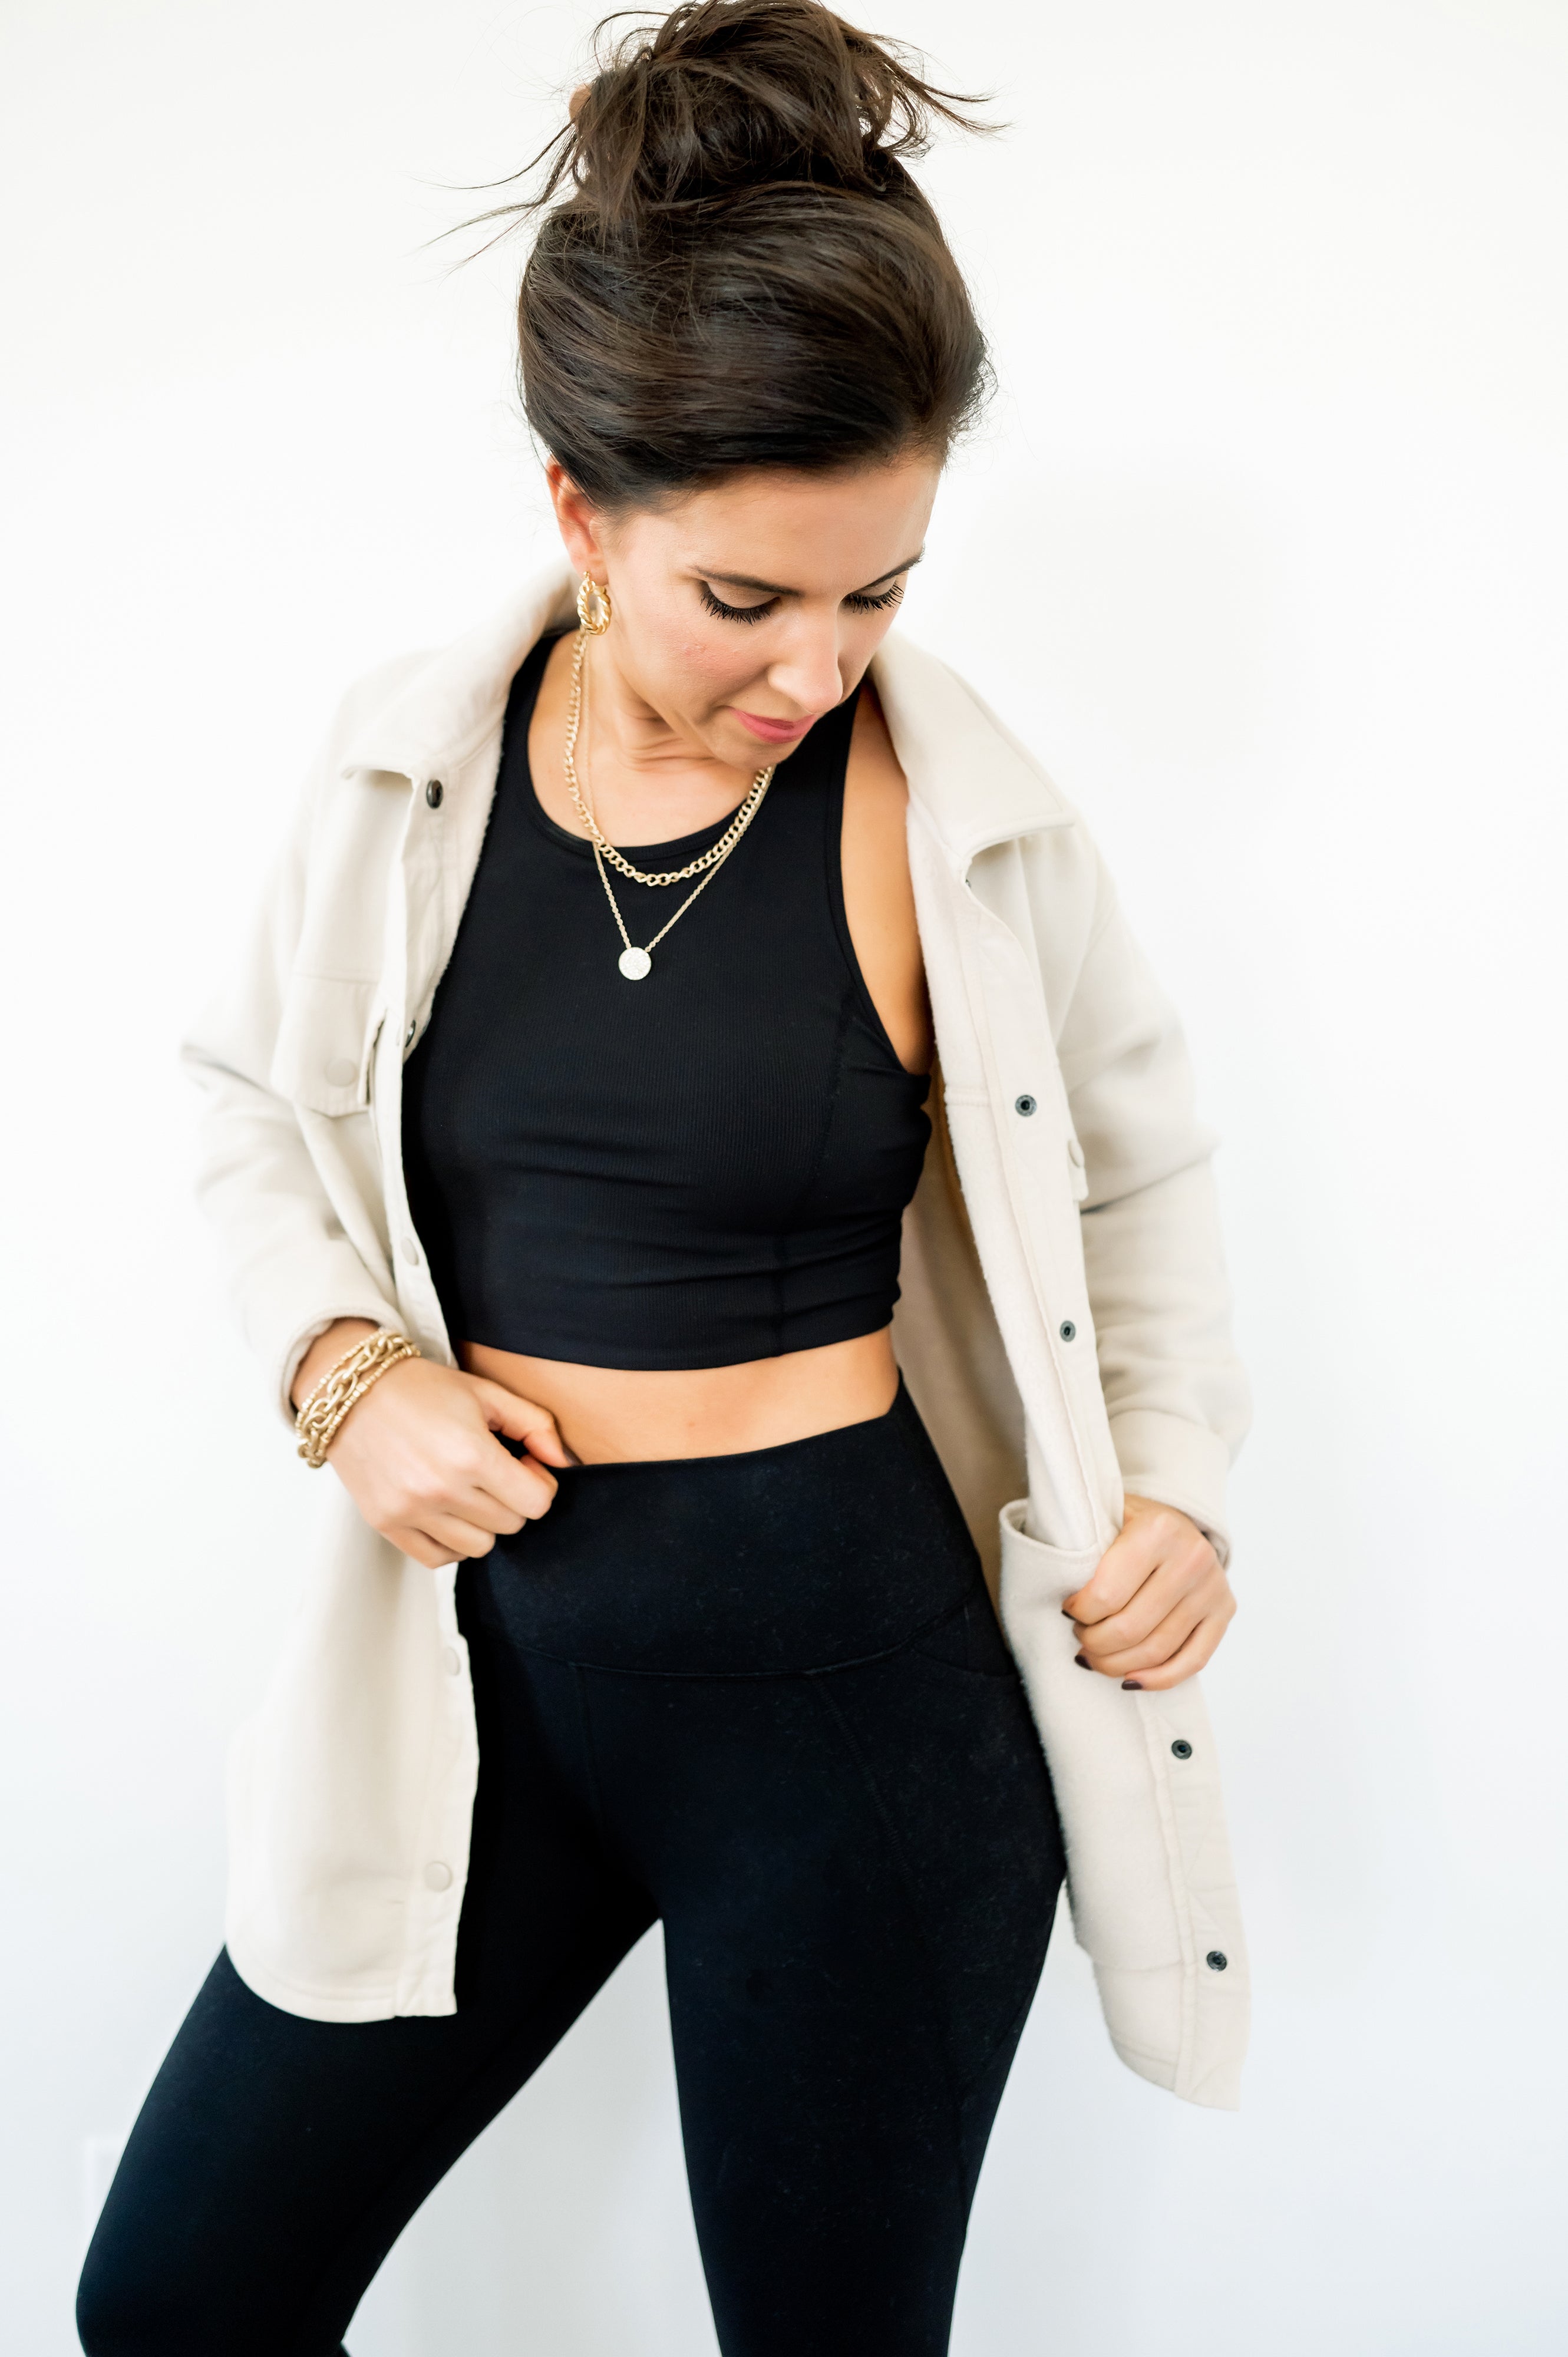 Ribbed active crop top, black leggings with pockets